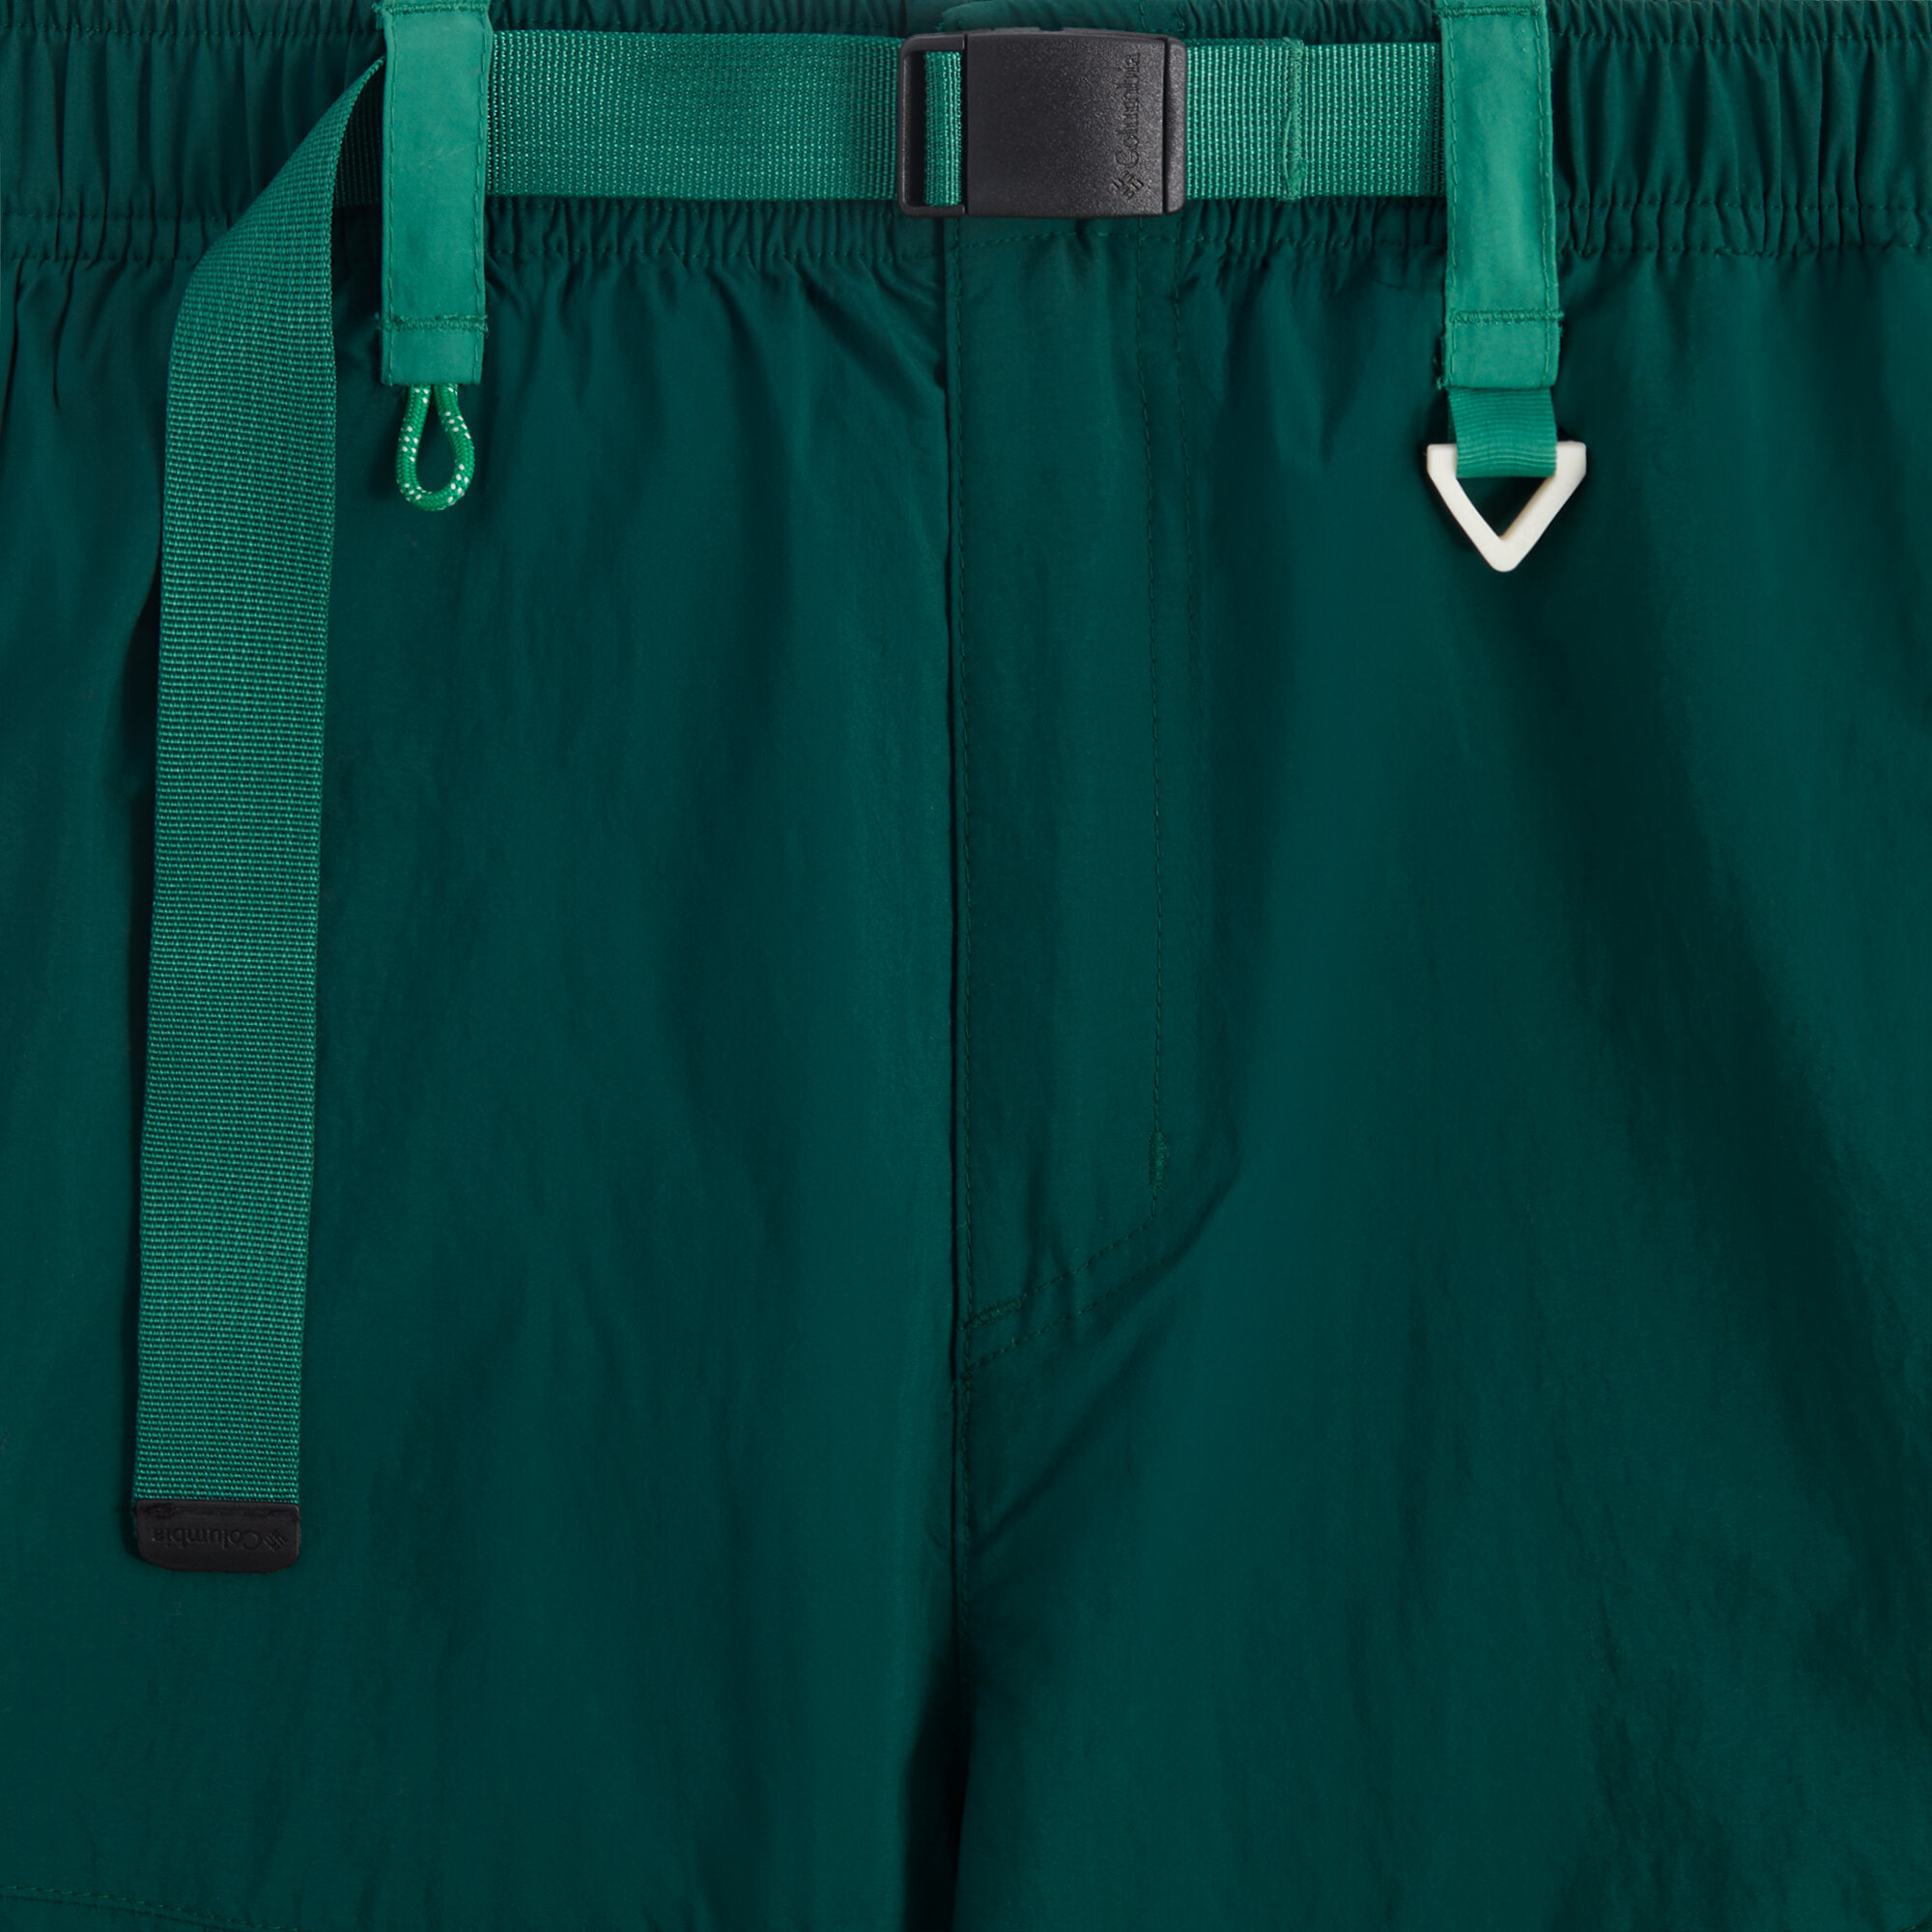 Kith for Columbia Retro Wide Leg Pant - Midnight Teal